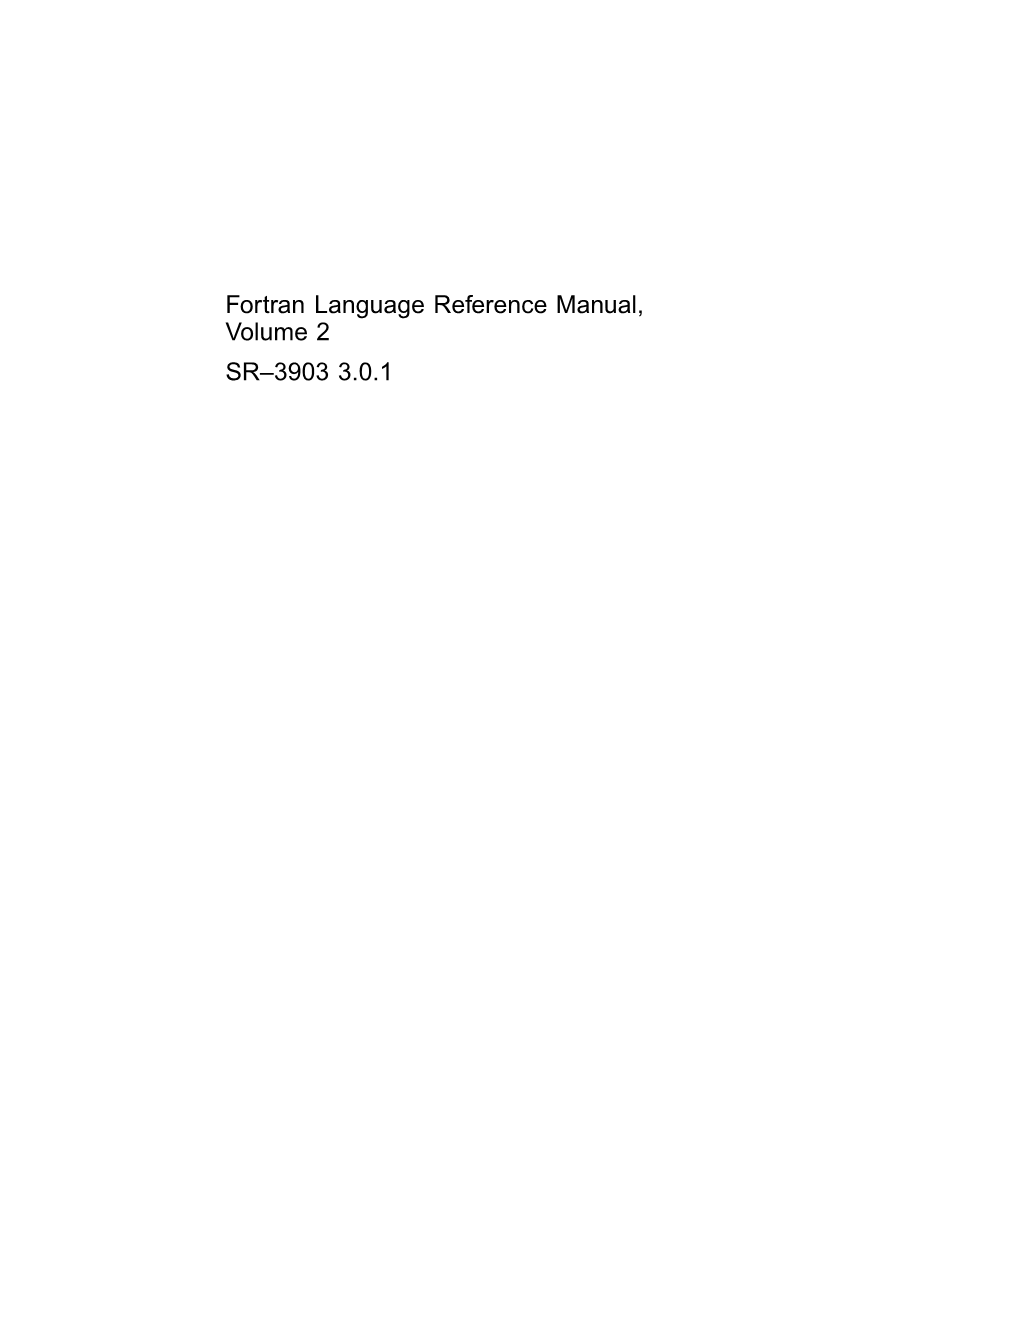 Fortran Language Reference Manual, Volume 2 SR–3903 3.0.1 Copyright © 1993, 1997 Cray Research, Inc